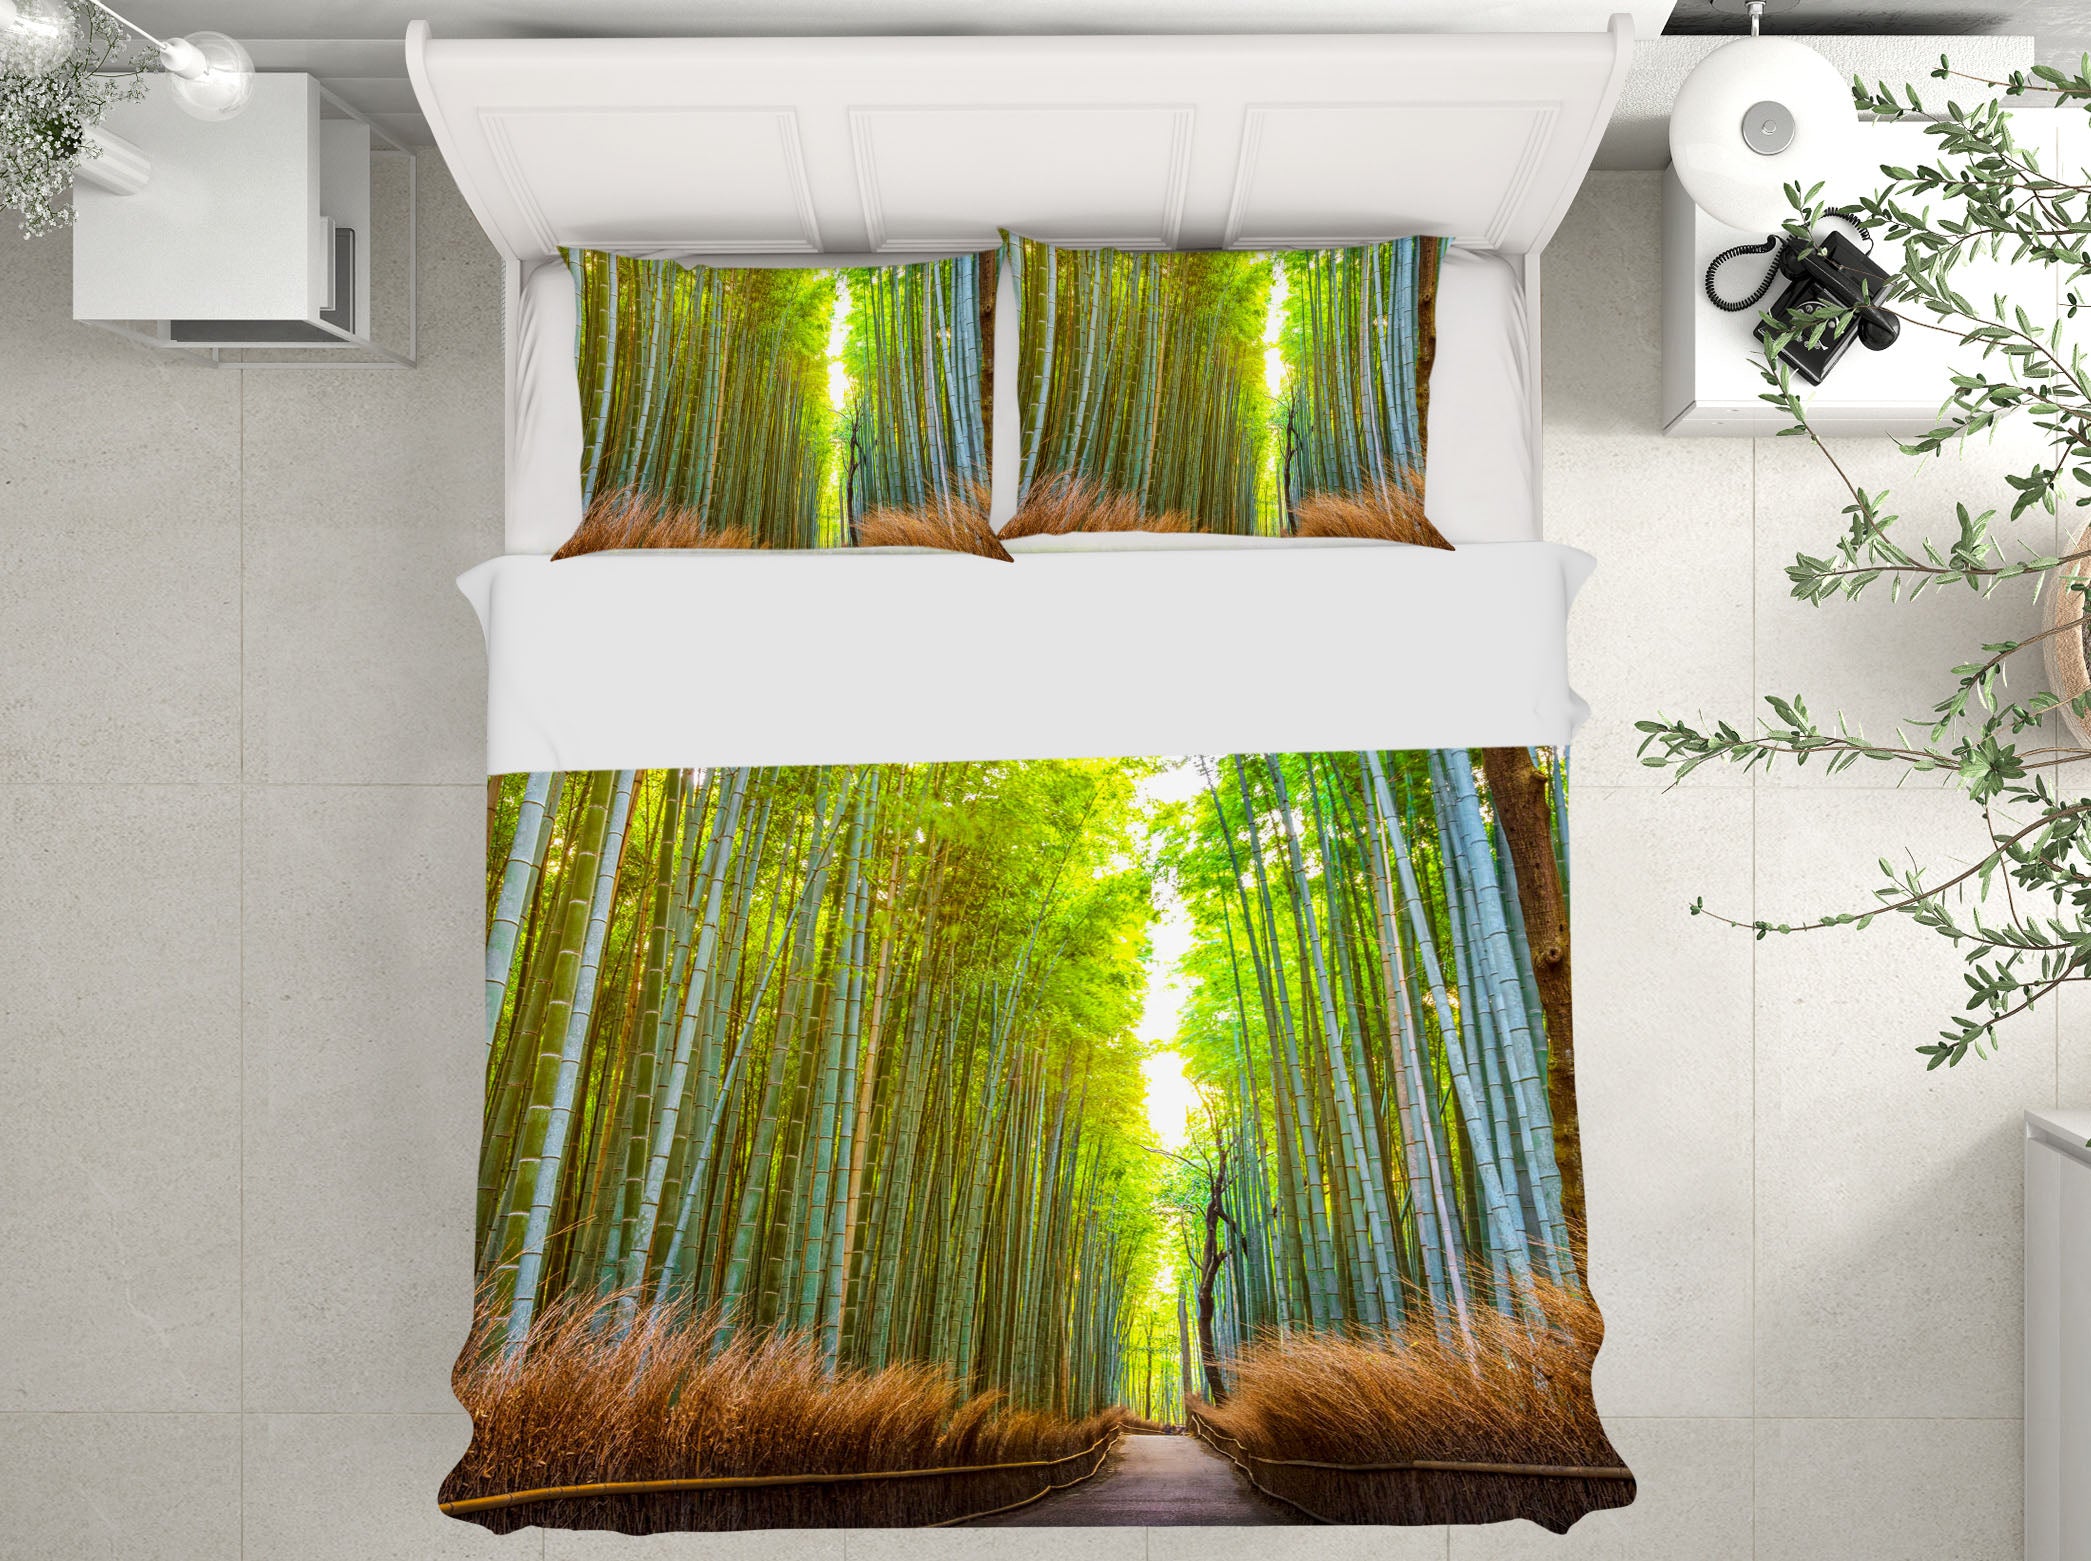 3D Kyoto Bamboo Forest 039 Marco Carmassi Bedding Bed Pillowcases Quilt